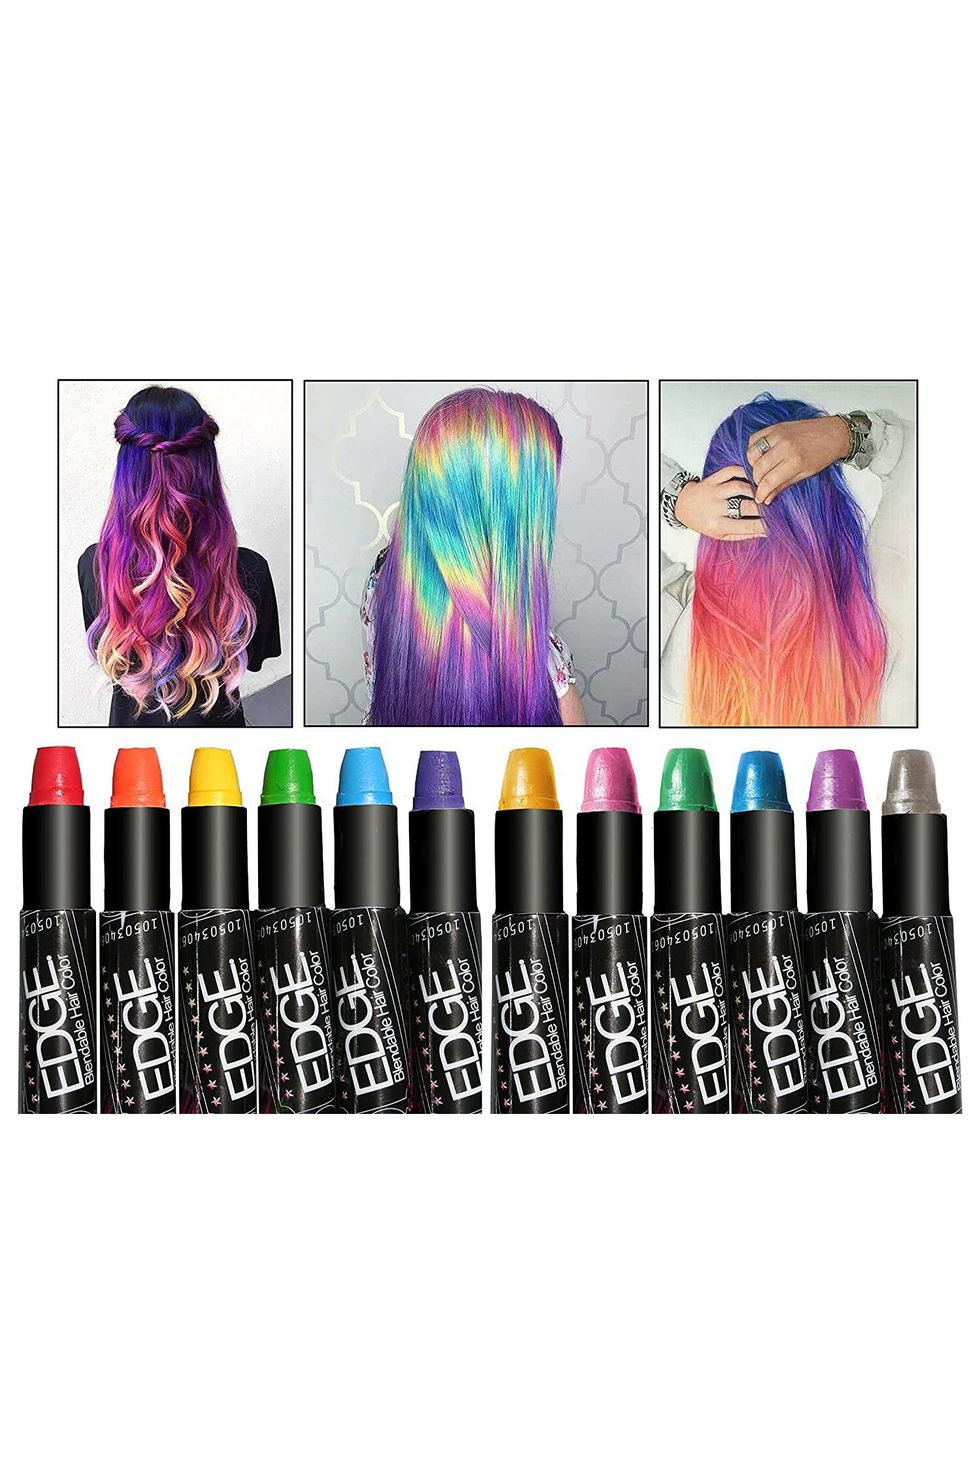 The best hair chalk for kids 2021